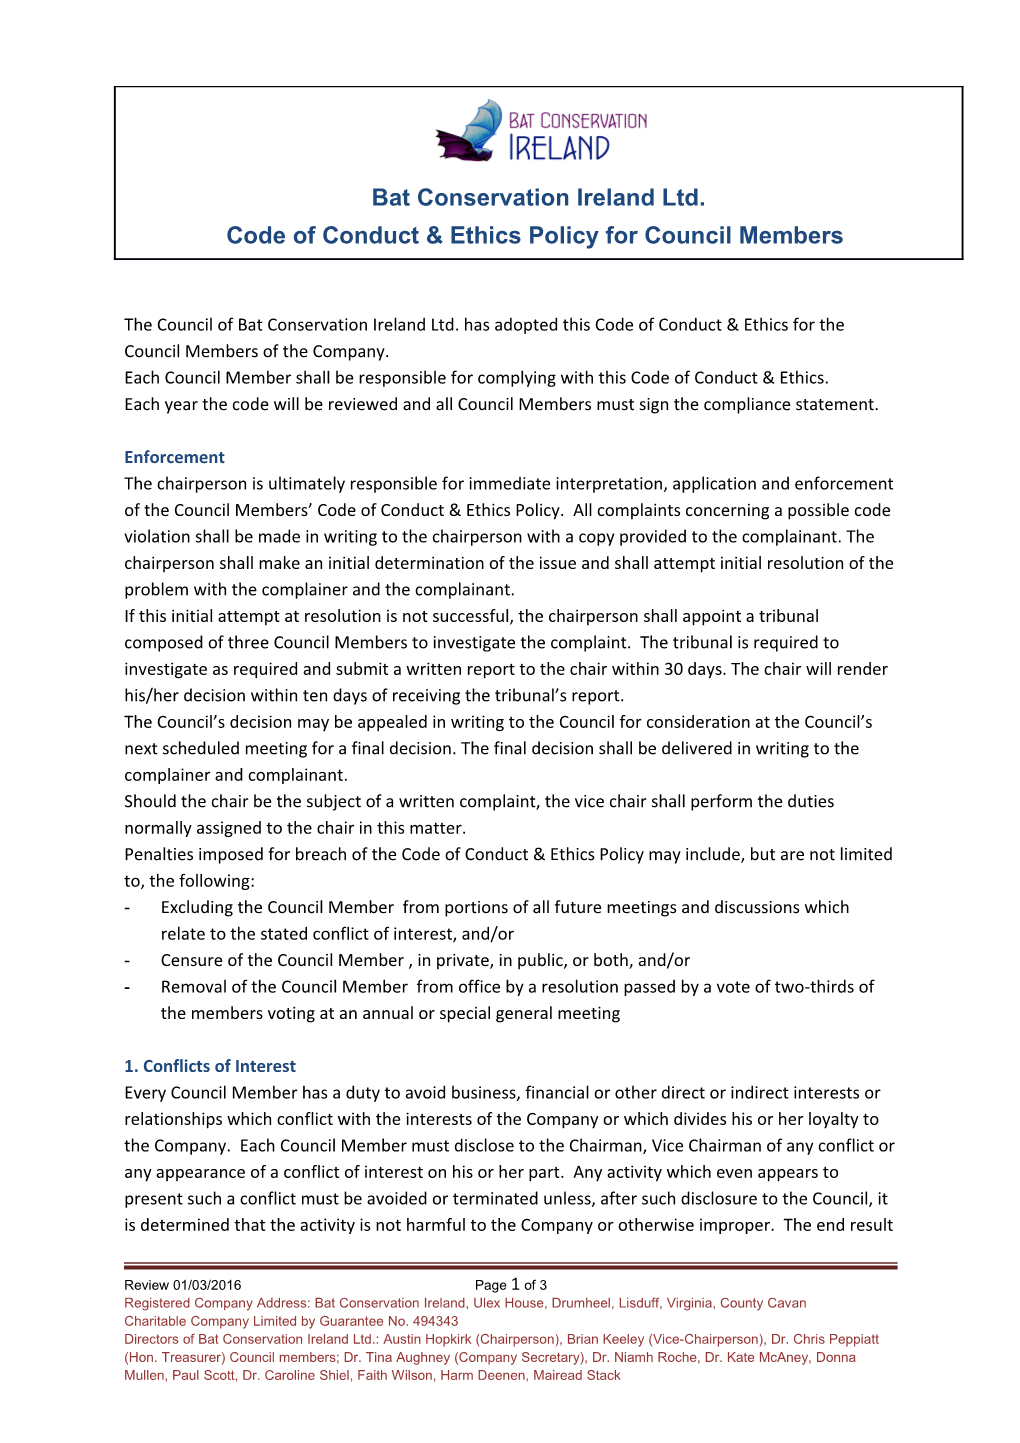 The Council of Bat Conservation Ireland Ltd. Has Adopted This Code of Conduct & Ethics